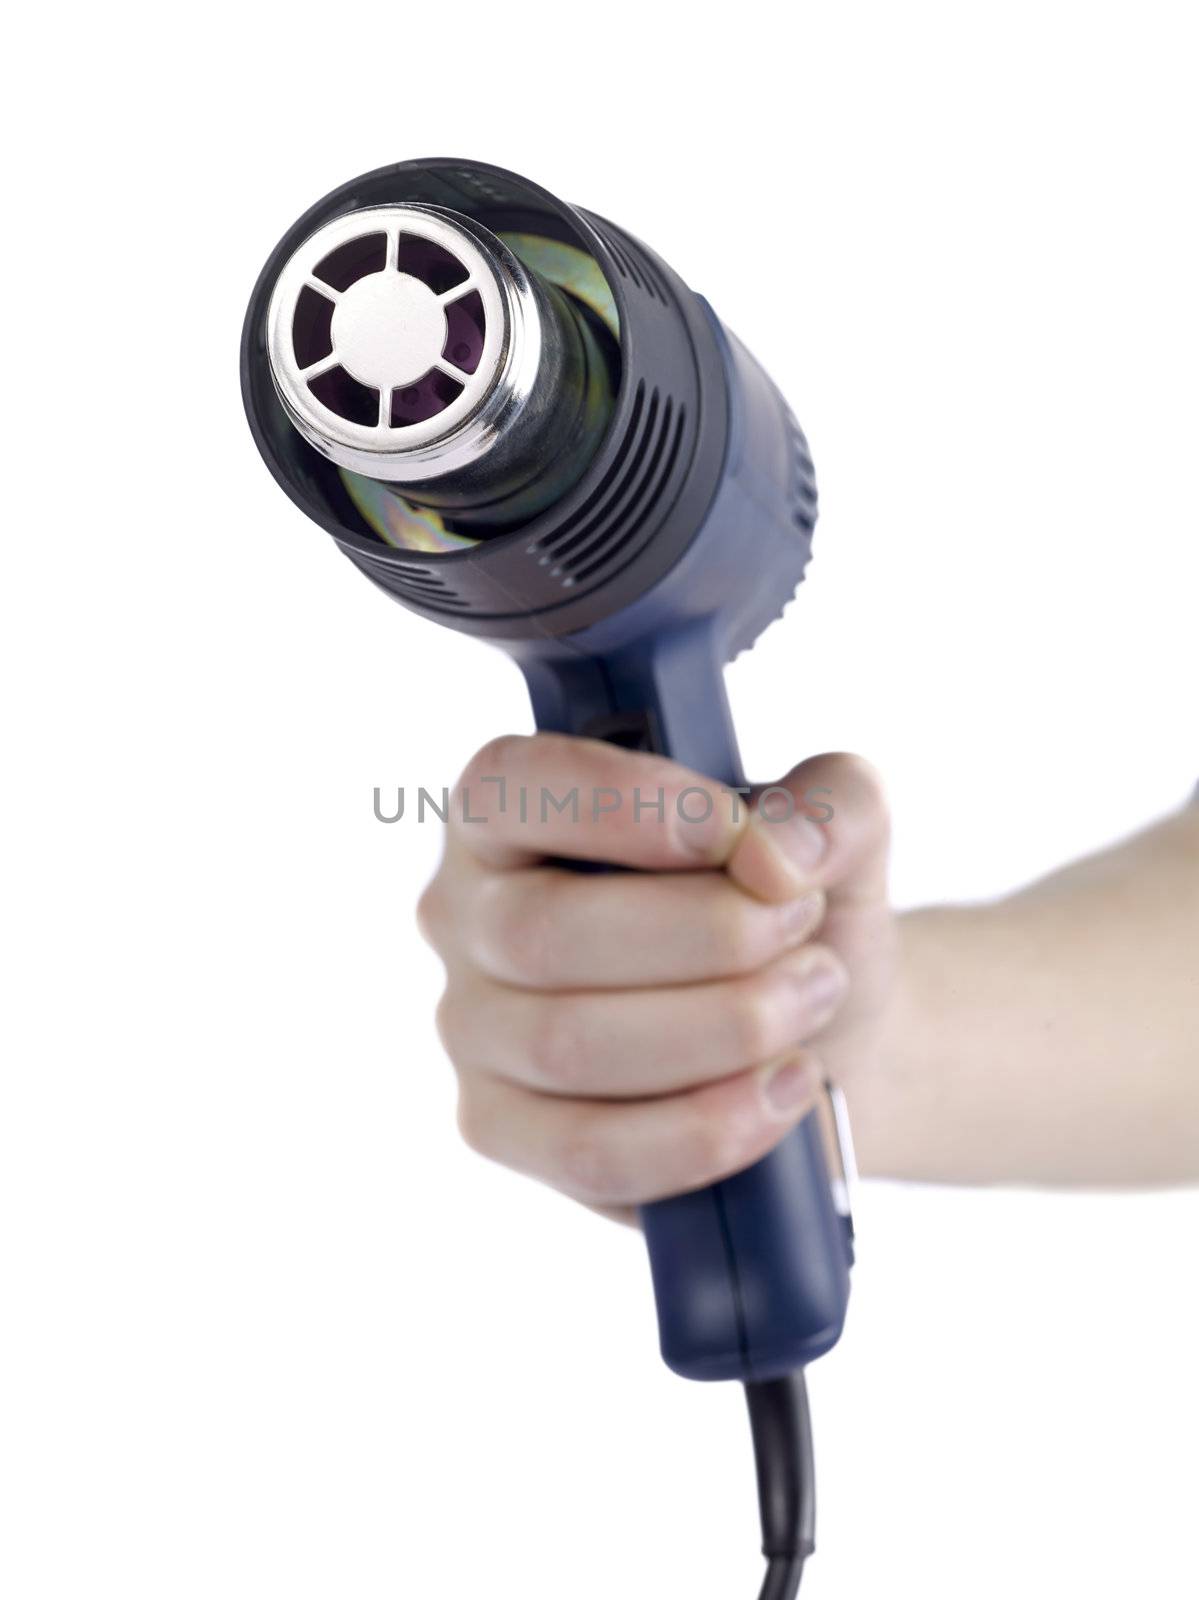 Cropped image of a hand holding an electric heat gun isolated in a white background